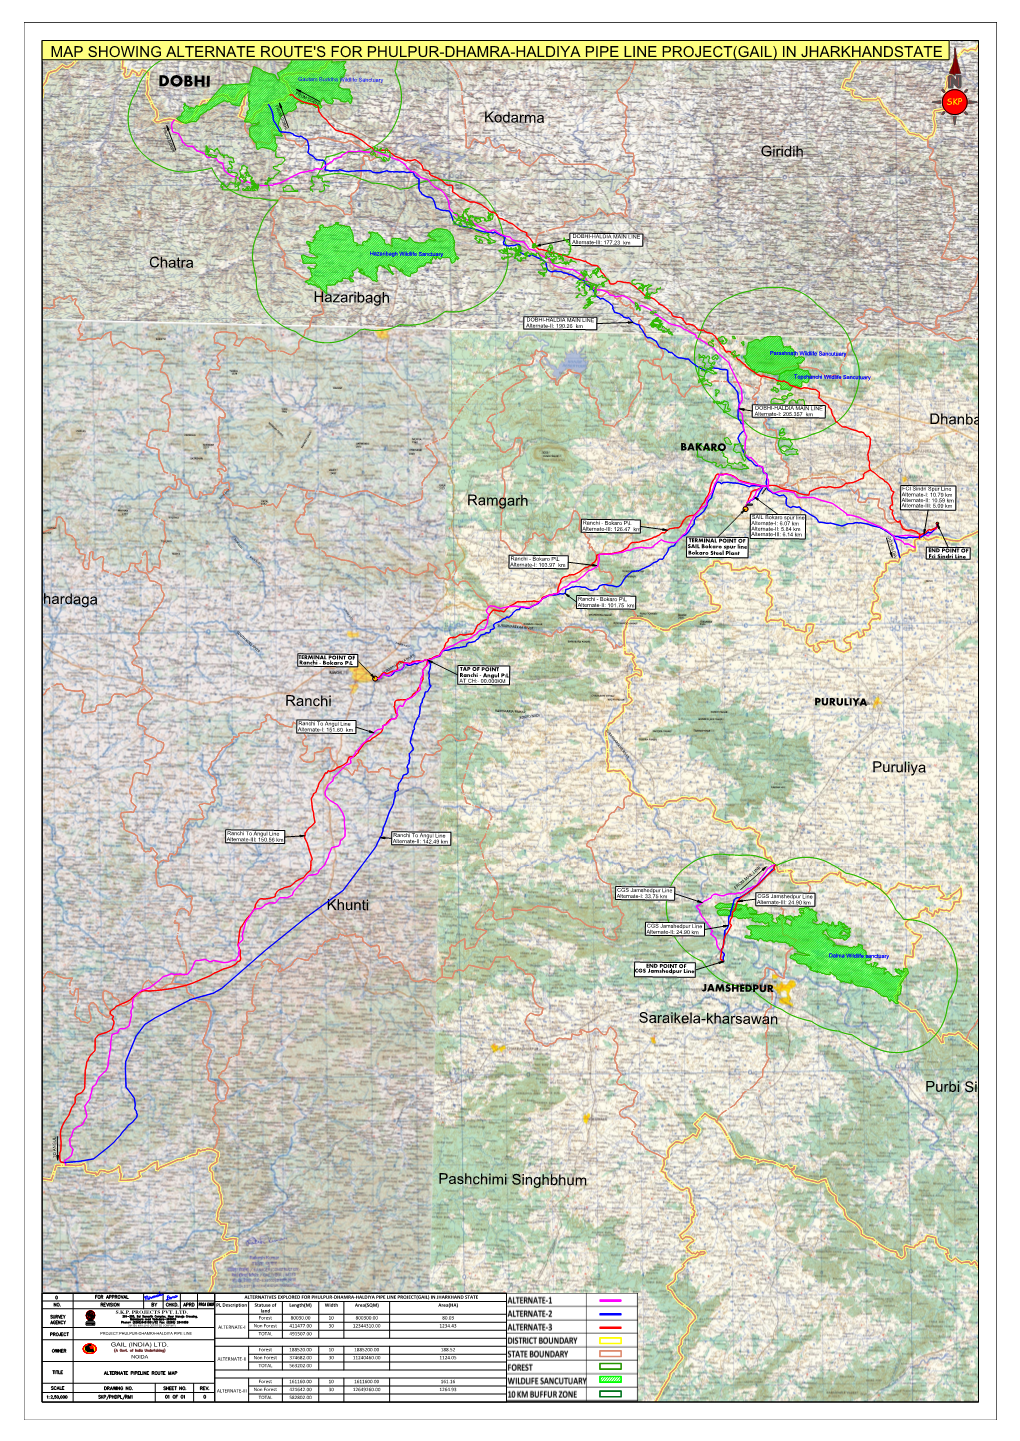 Map Showing Alternate Route's for Phulpur-Dhamra-Haldiya Pipe Line Project(Gail) in Jharkhandstate